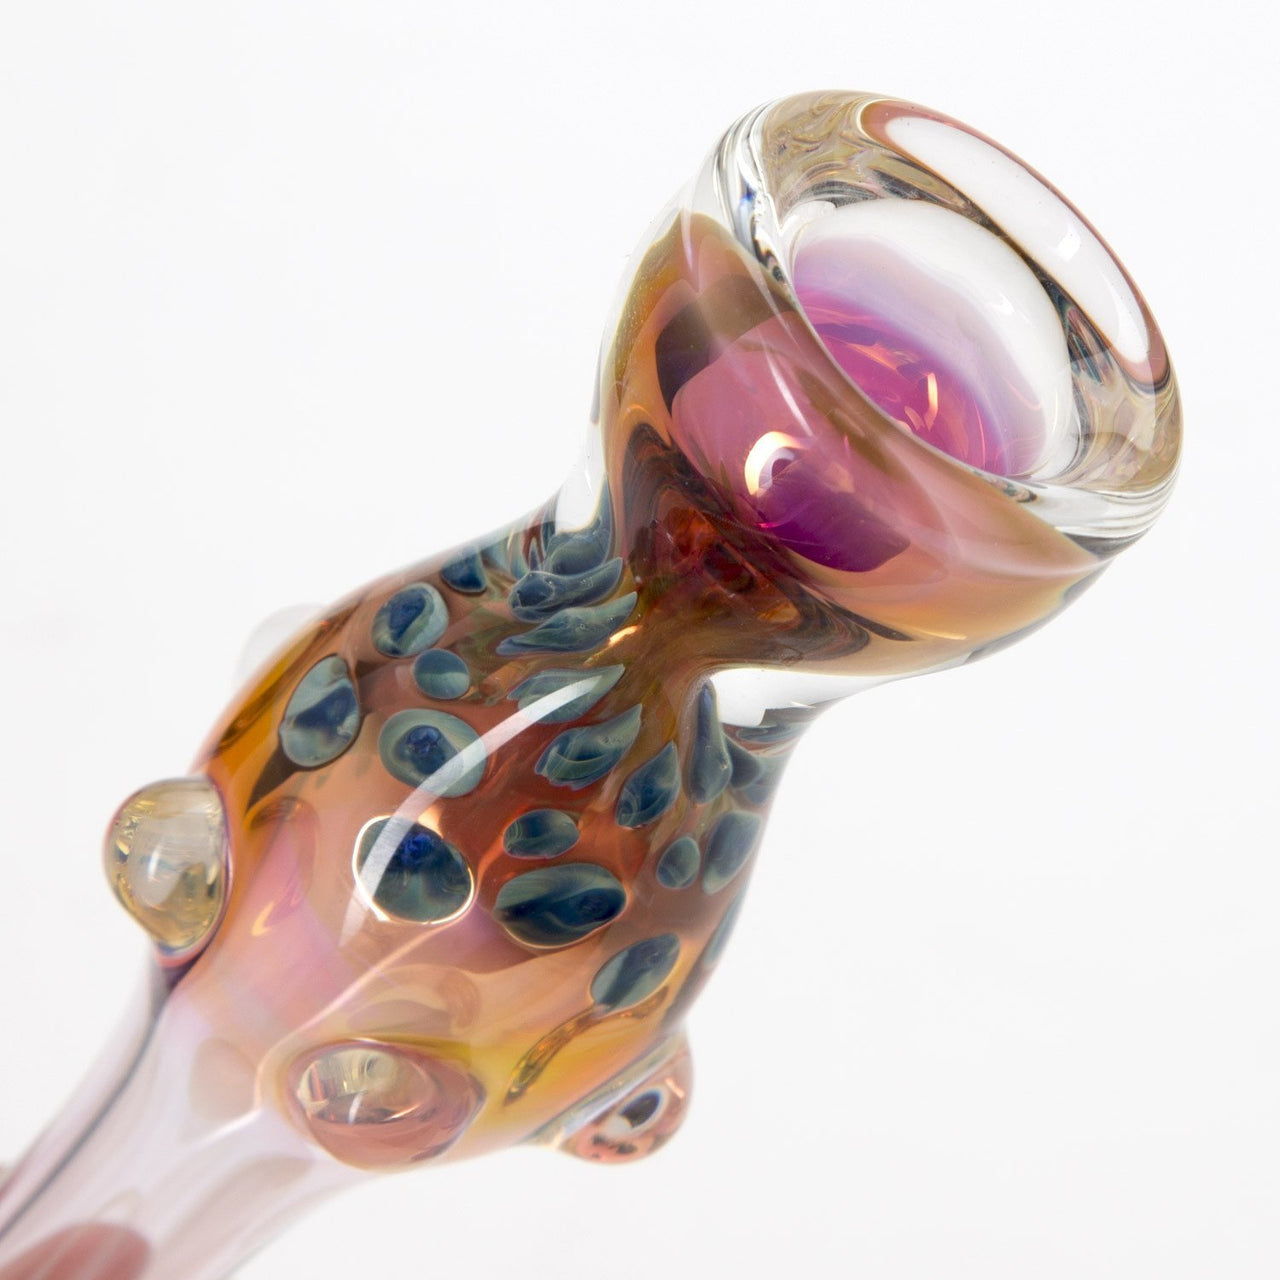 Home Blown Glass Inside Out One Hitter - Large - 420 Science - The most trusted online smoke shop.